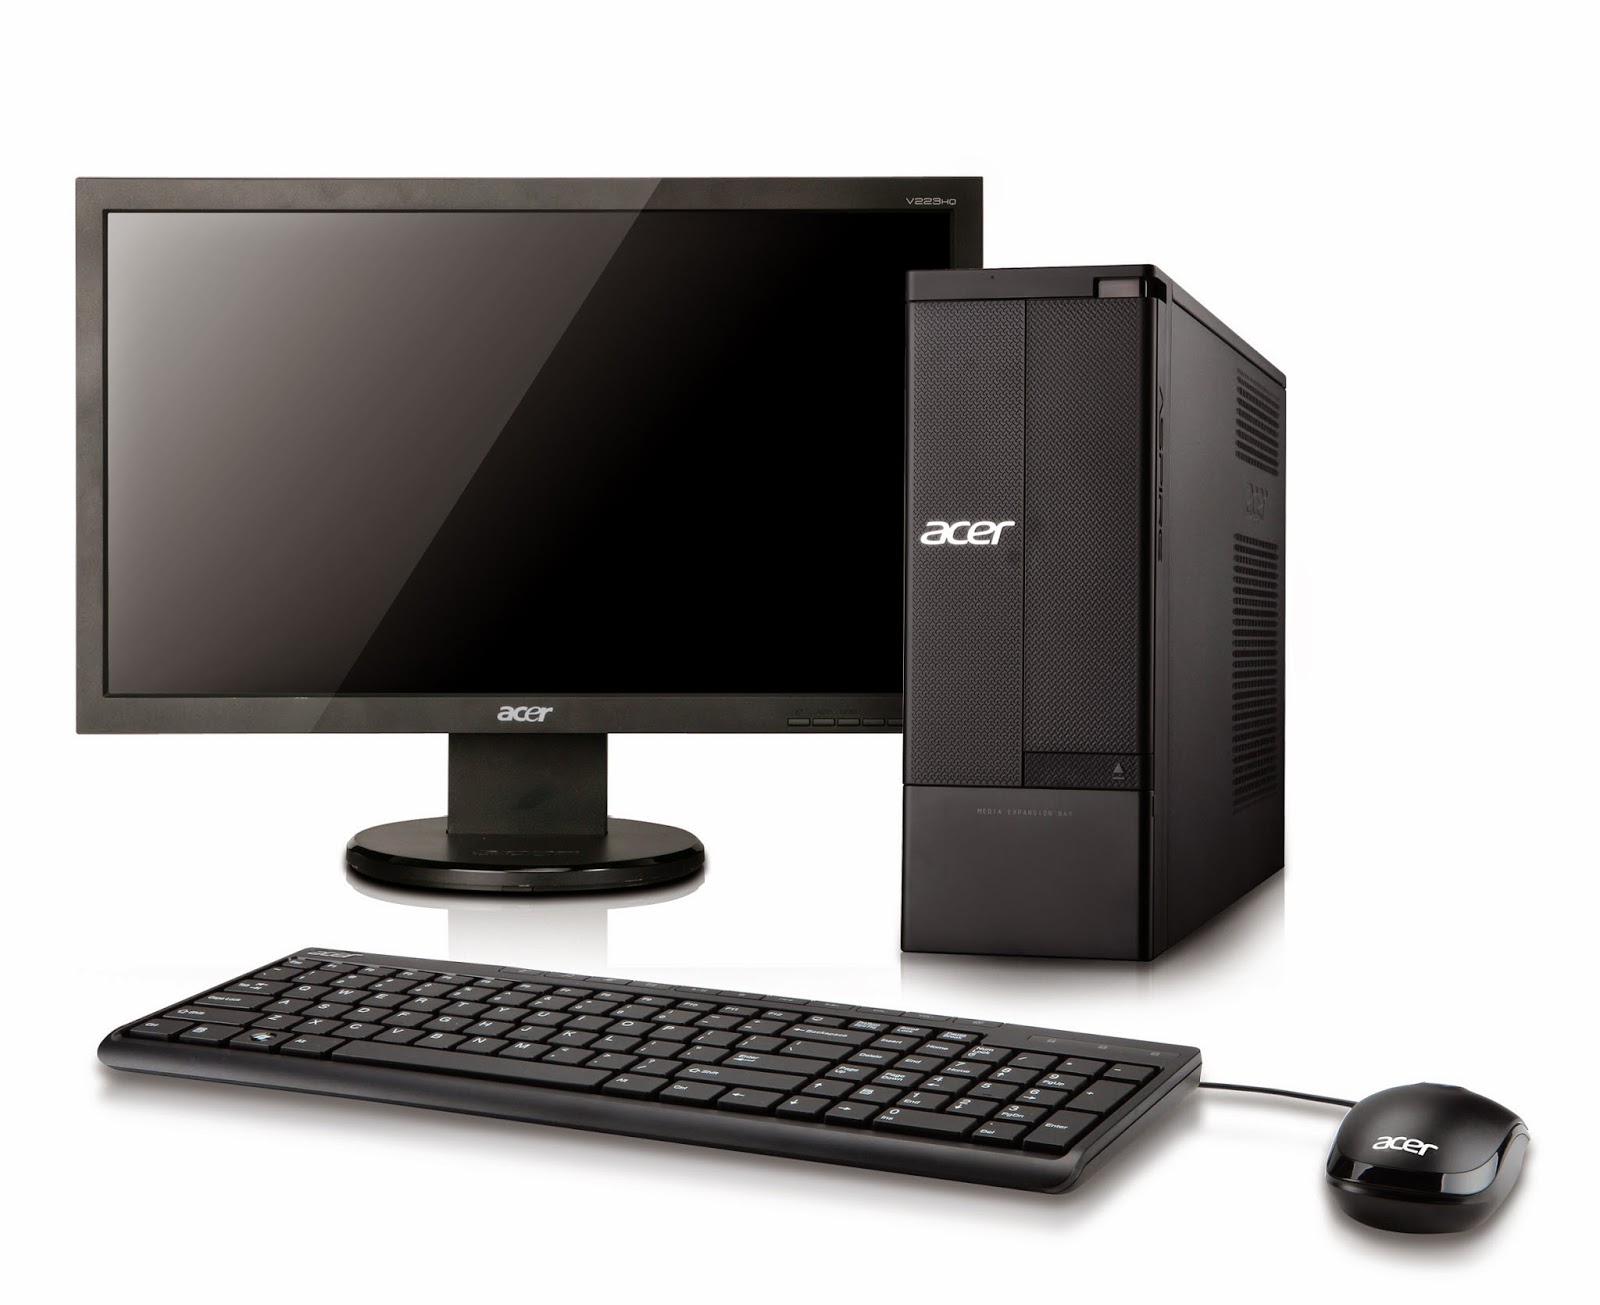 Acer Aspire X1930 Drivers Download for Windows 7 ...